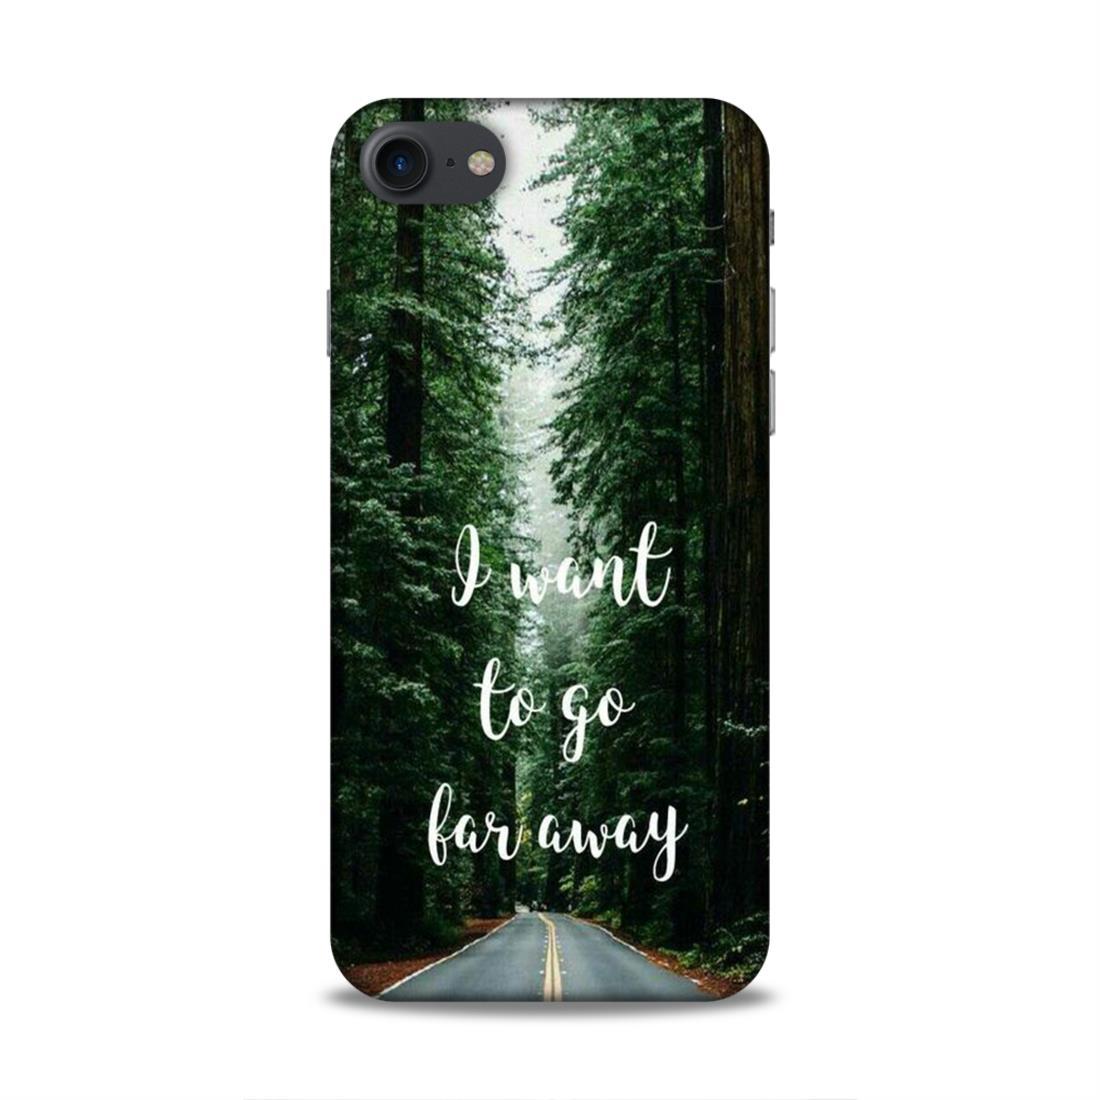 I Want To Go Far Away iPhone 8 Phone Cover